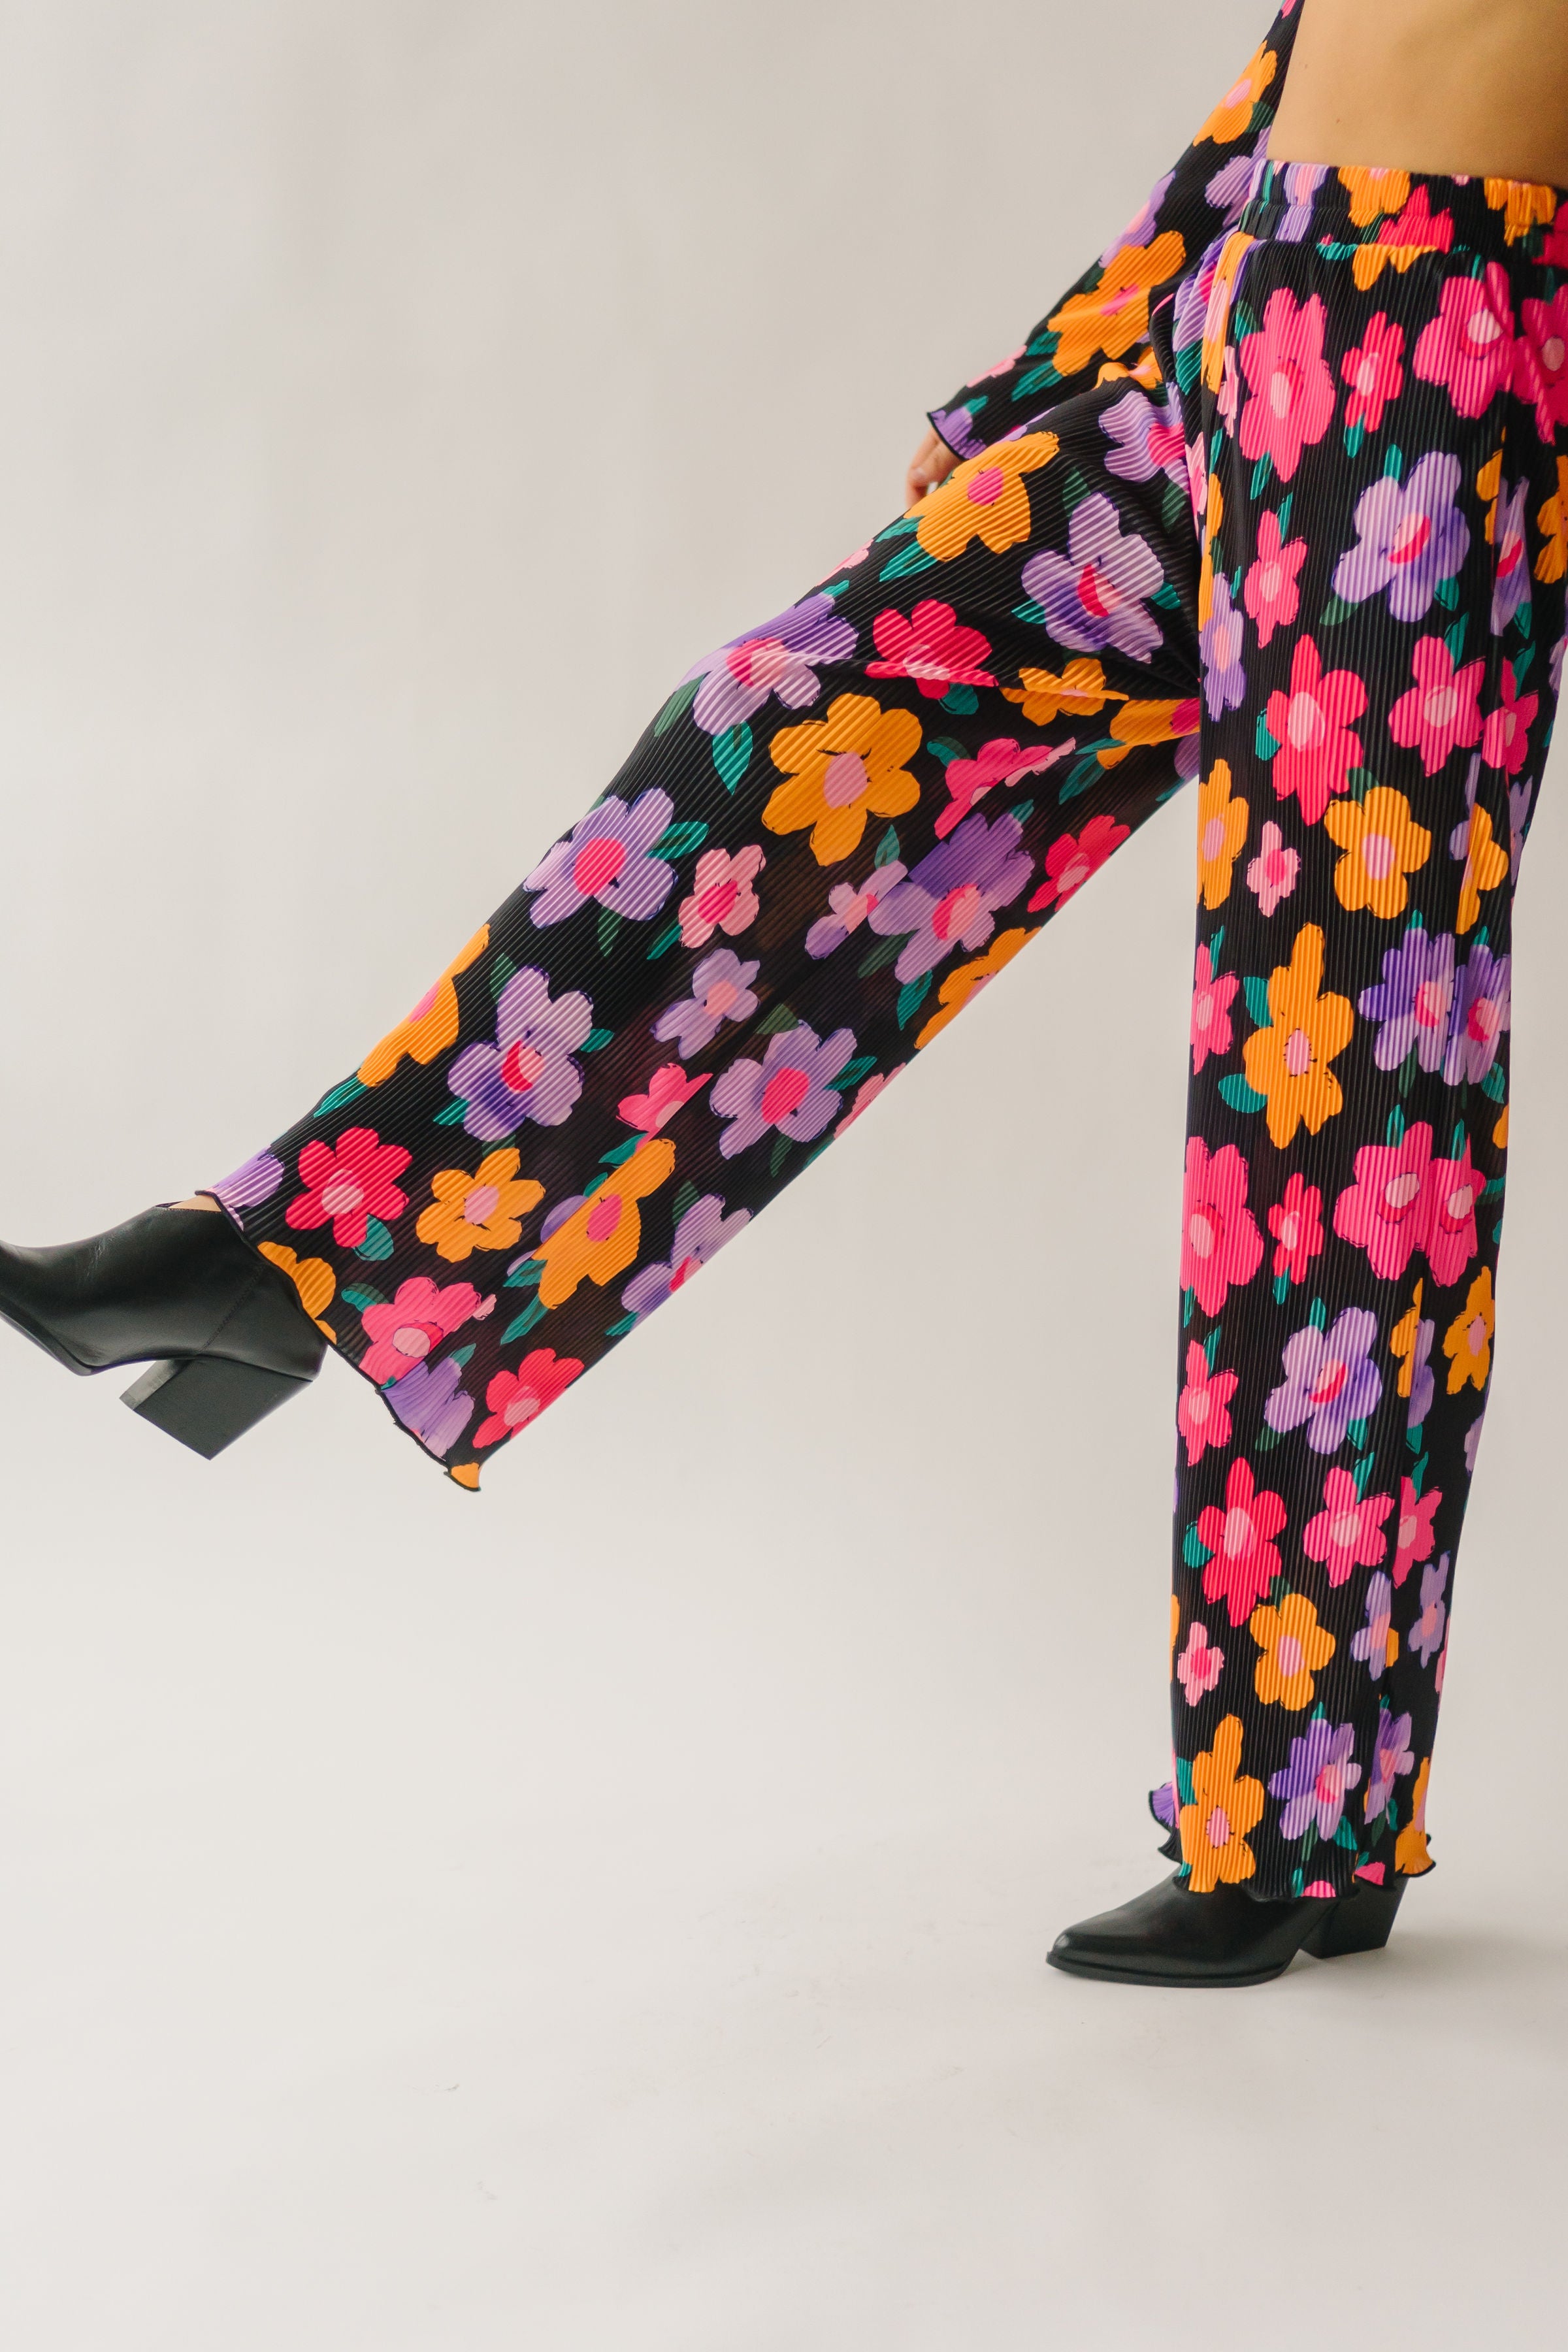 4,369 Floral Trousers Images, Stock Photos, 3D objects, & Vectors